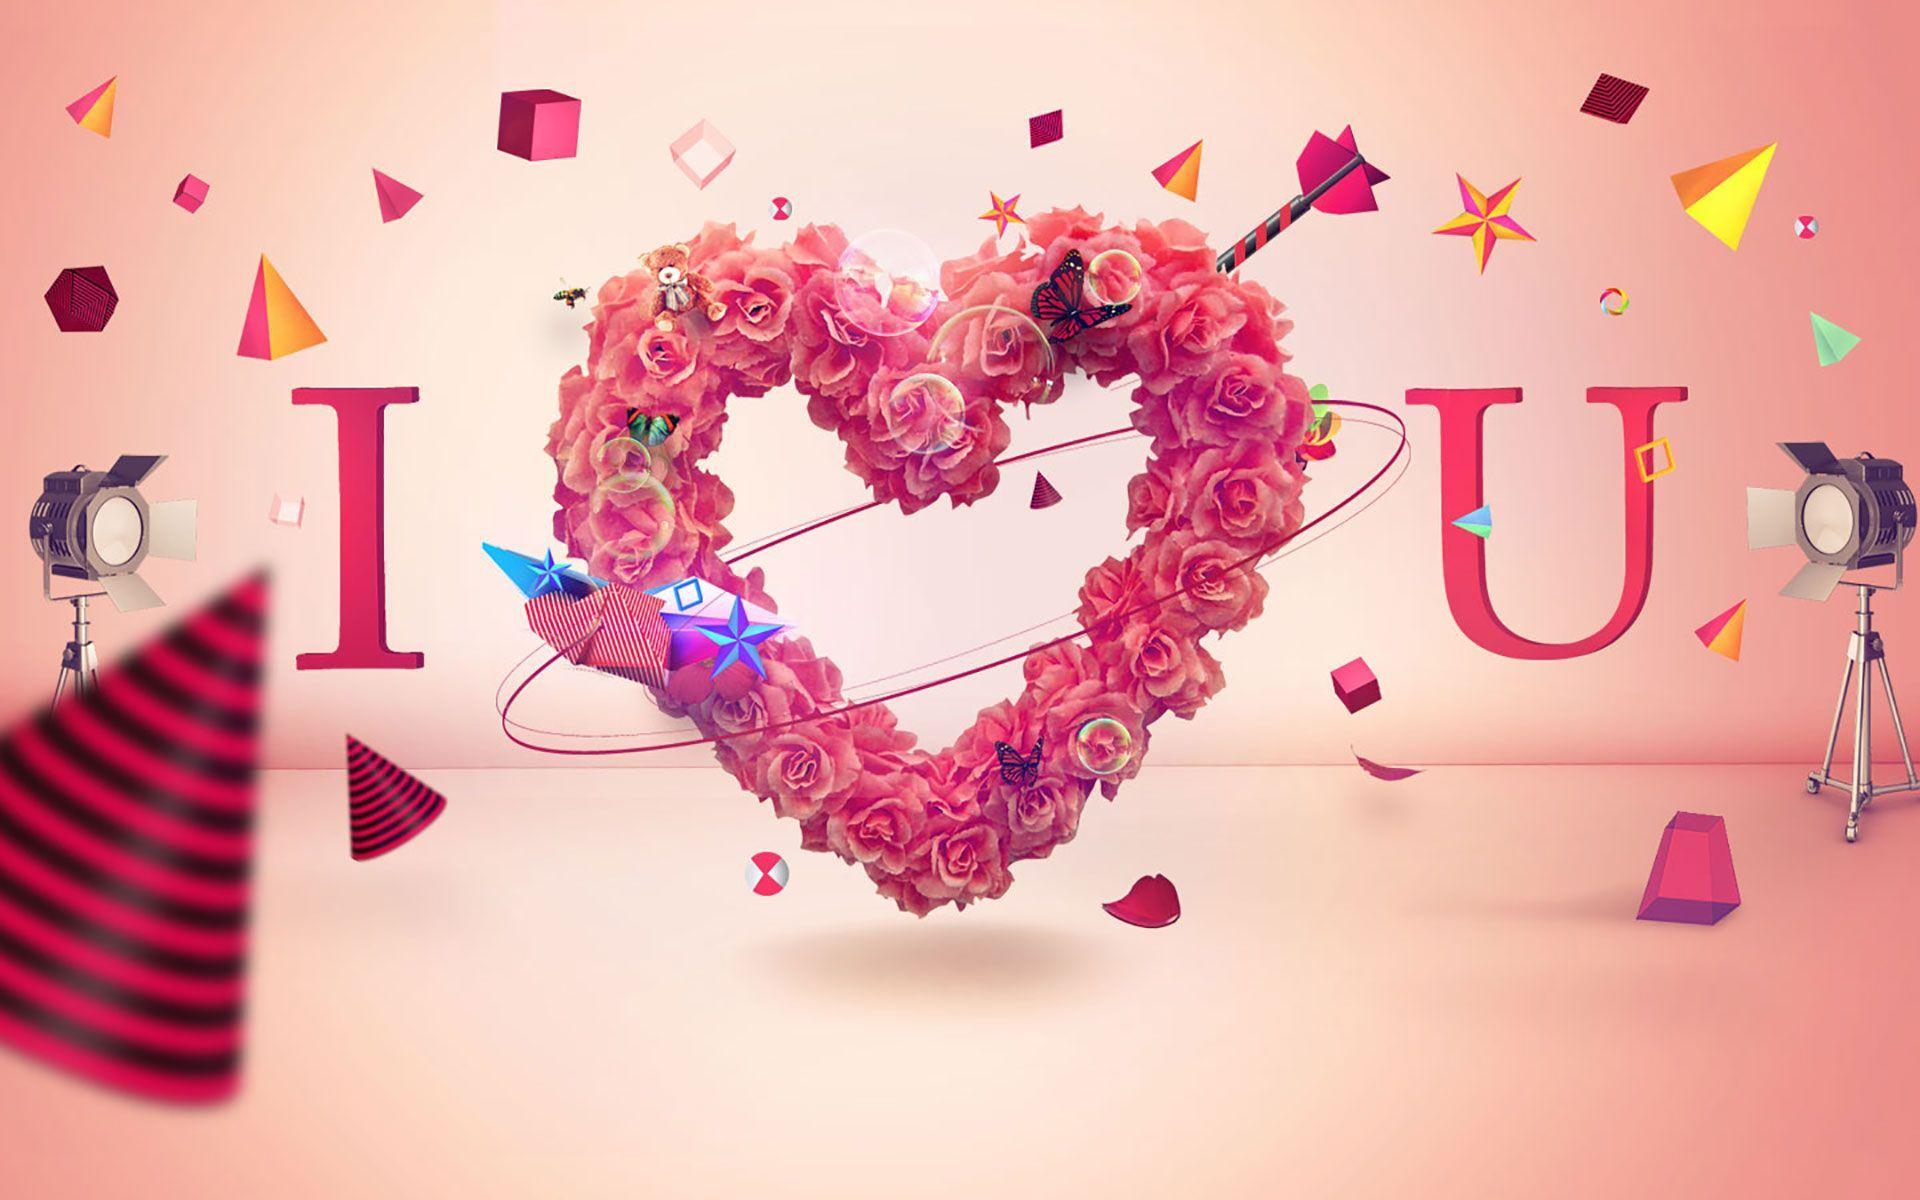 Best I Love You Image Collection for Whatsapp.